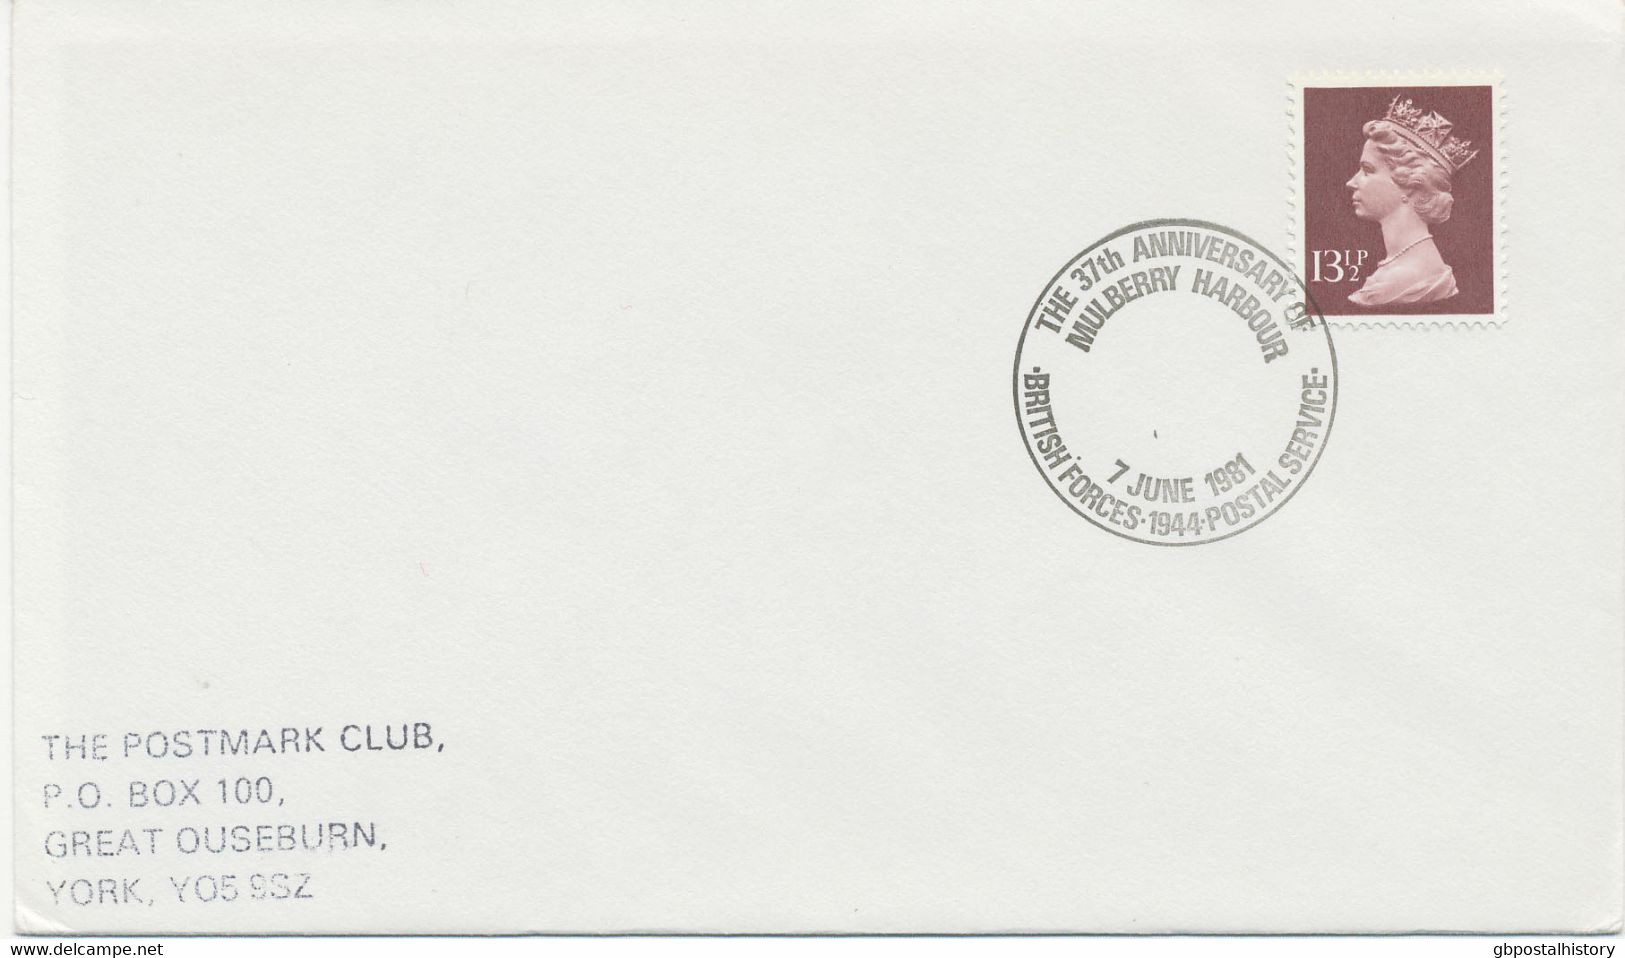 GB SPECIAL EVENT POSTMARKS THE 37th ANNIVERSARY OF MULBERRY HARBOUR - 7 JUNE 1981 - BRITISH FORCES 1944 POSTAL SERVICE - Storia Postale